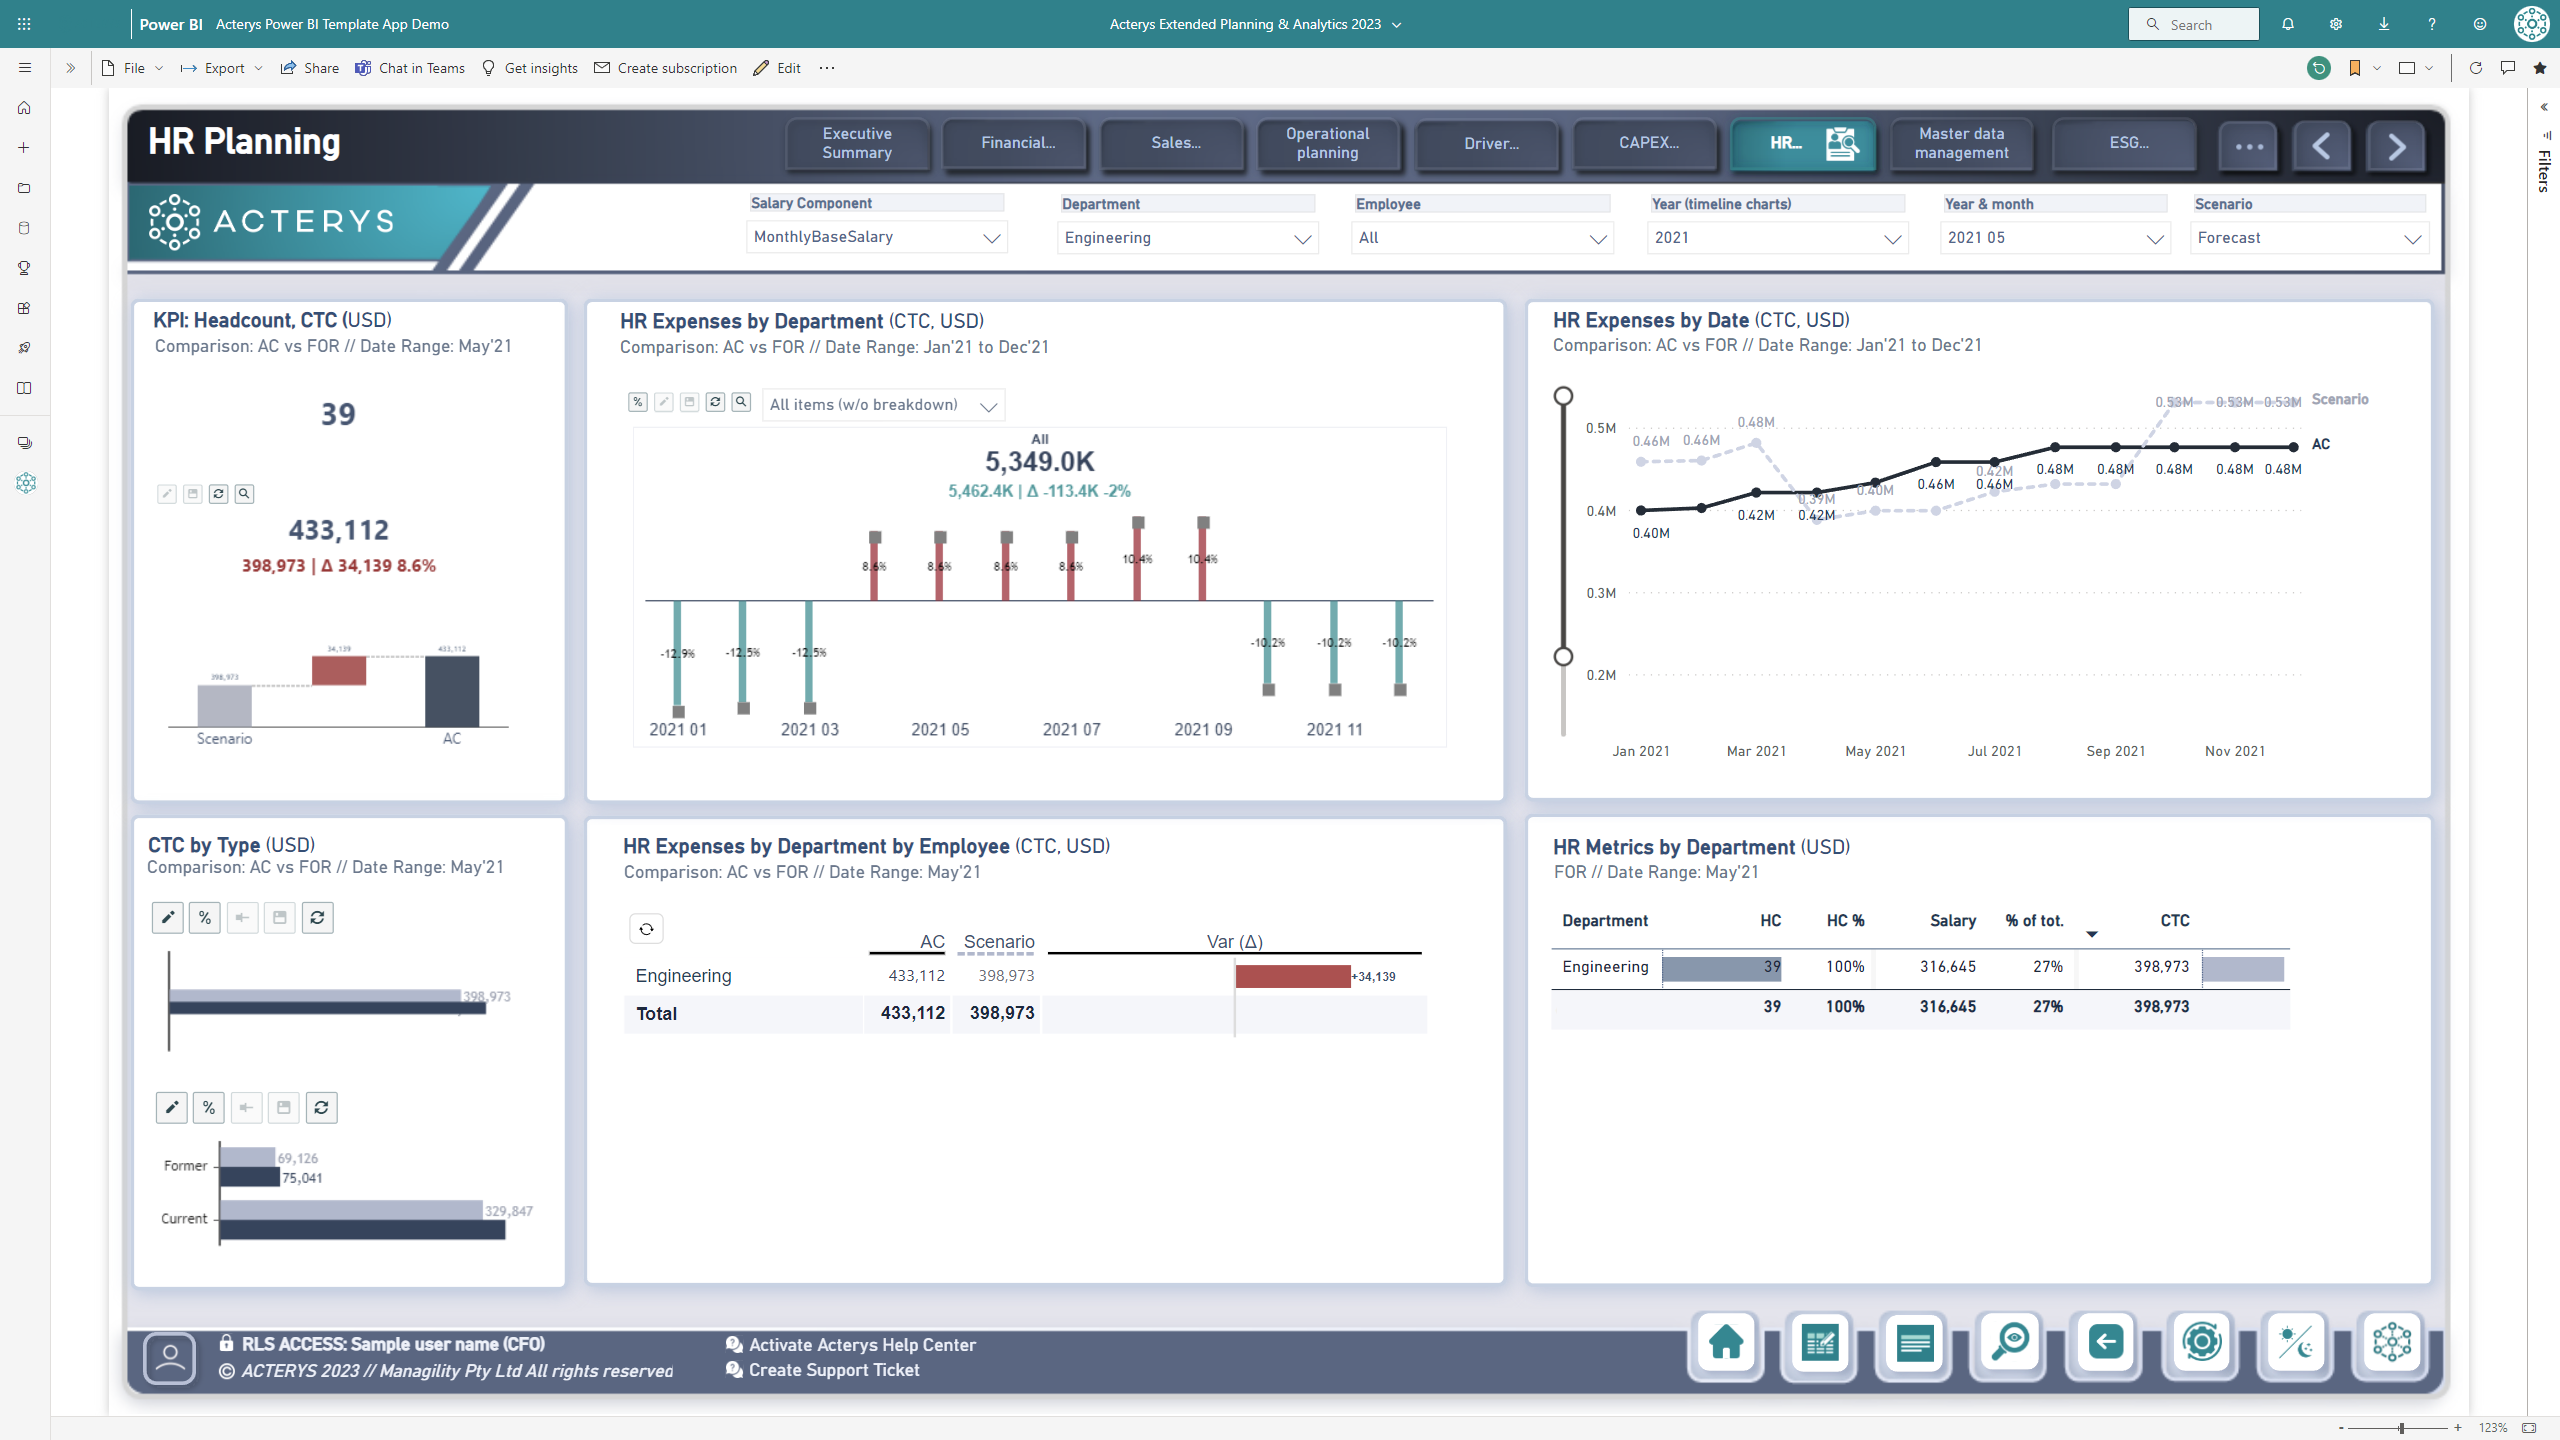 Acterys Extended Planing and Analytics -- Workforce Planning